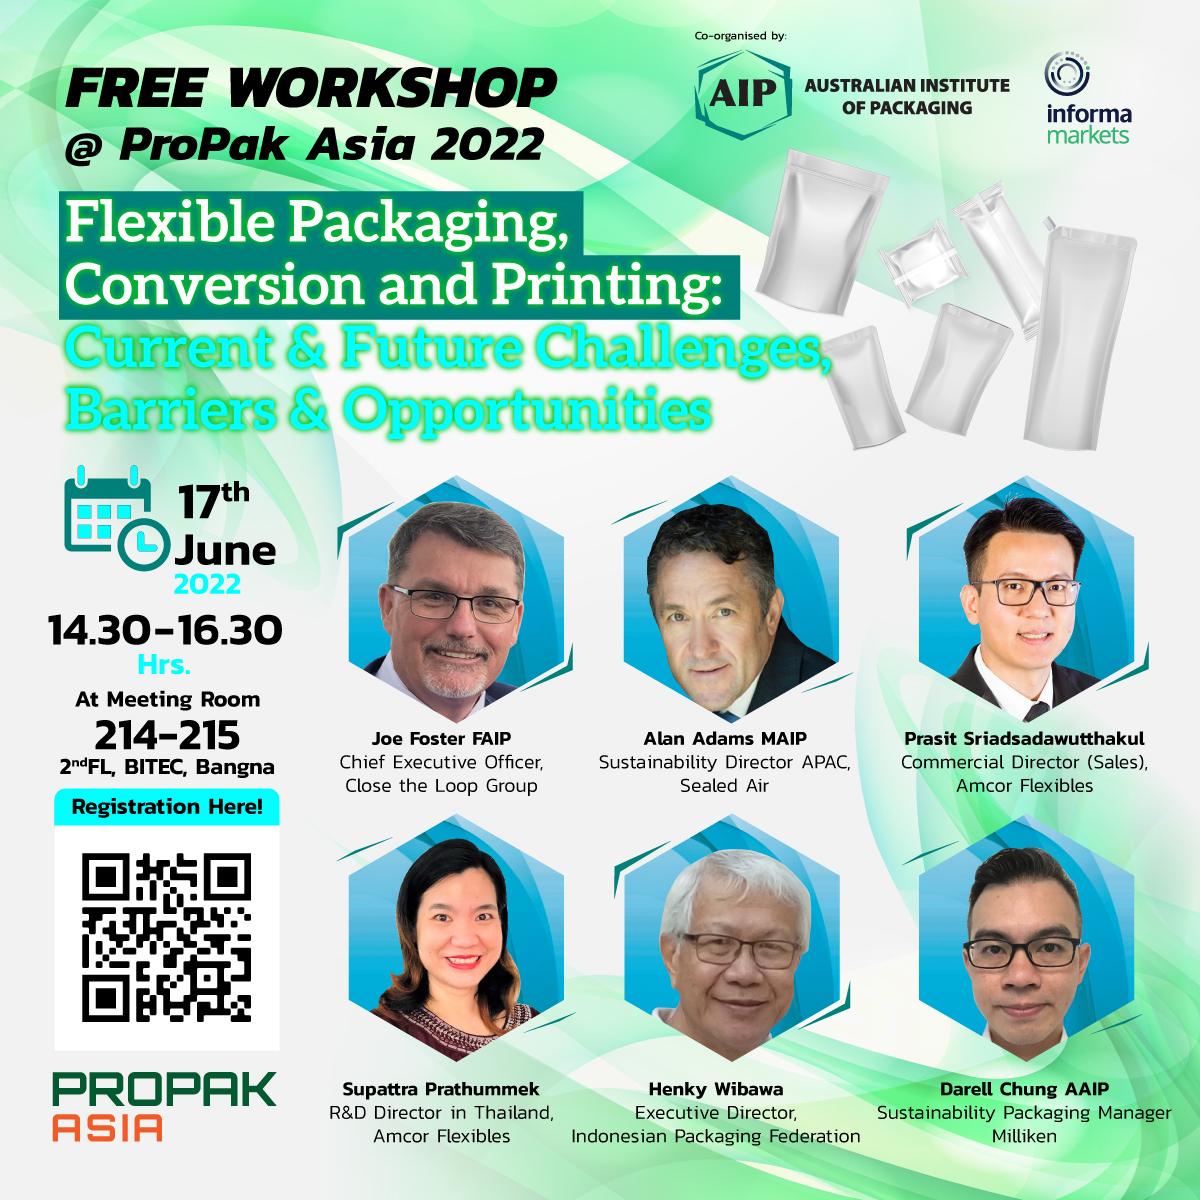 “Flexible Packaging, Conversion and Printing: Current & Future Challenges, Barriers & Opportunities”